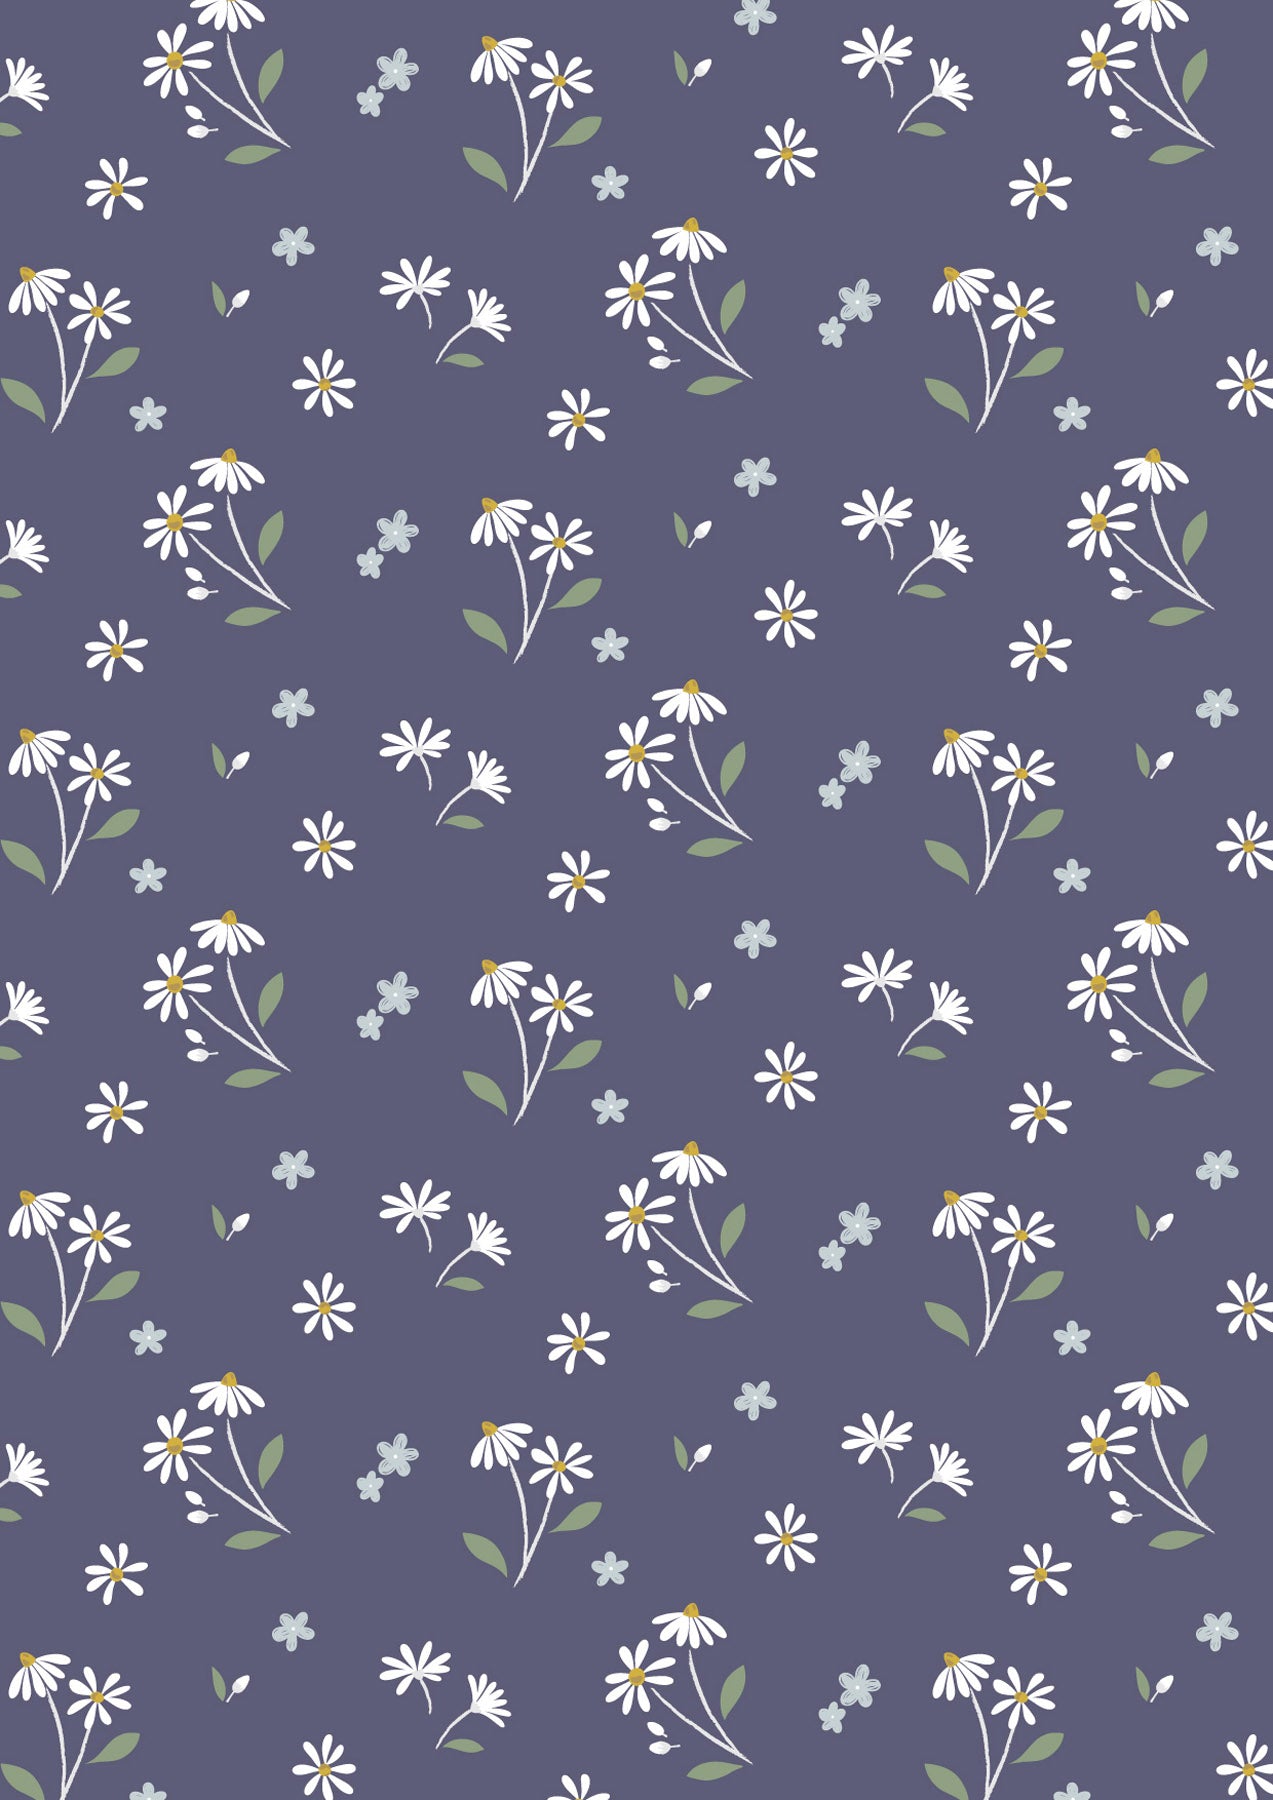 Daisies Dancing on Navy Blue - Floral Song